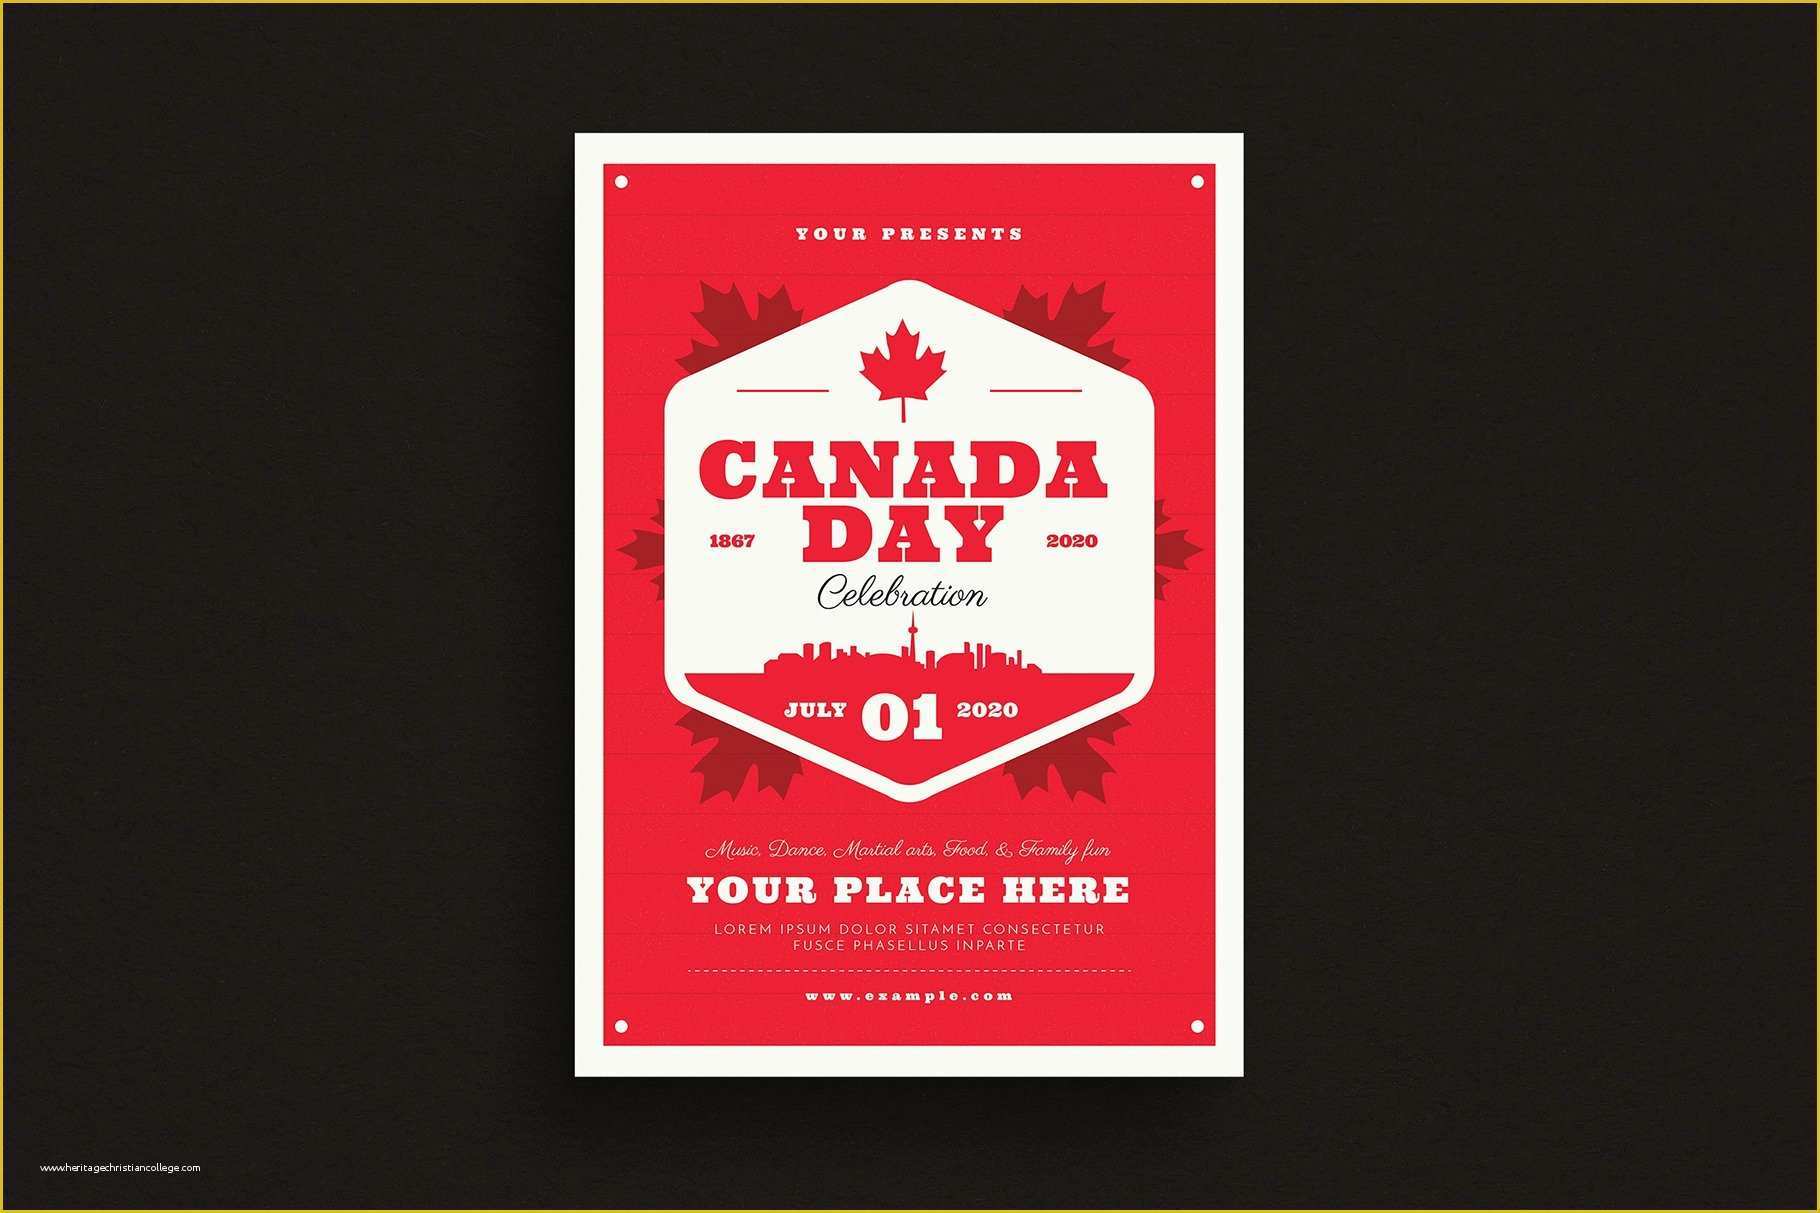 Canada Day Flyer Template Free Of Canada Day event Flyer Flyer Templates Creative Market